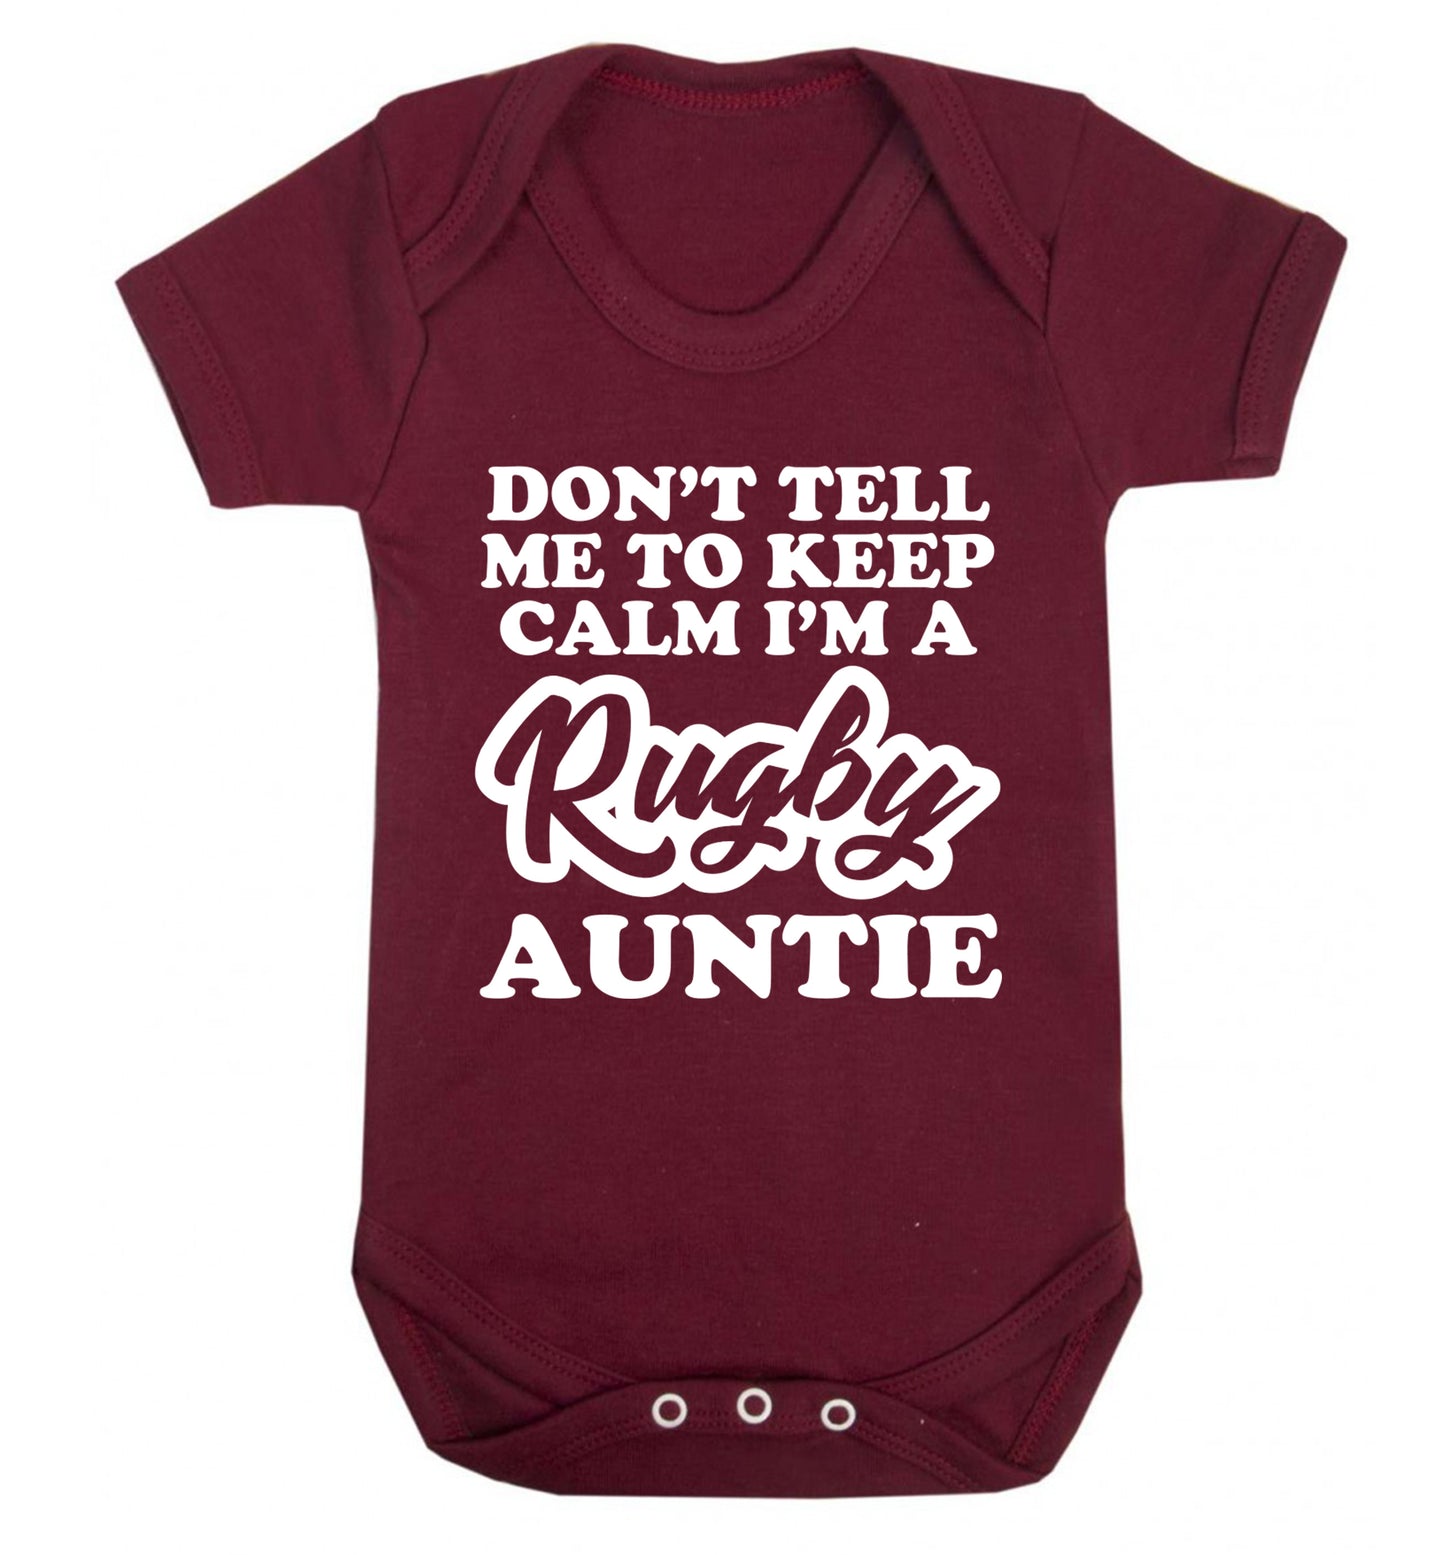 Don't tell me keep calm I'm a rugby auntie Baby Vest maroon 18-24 months